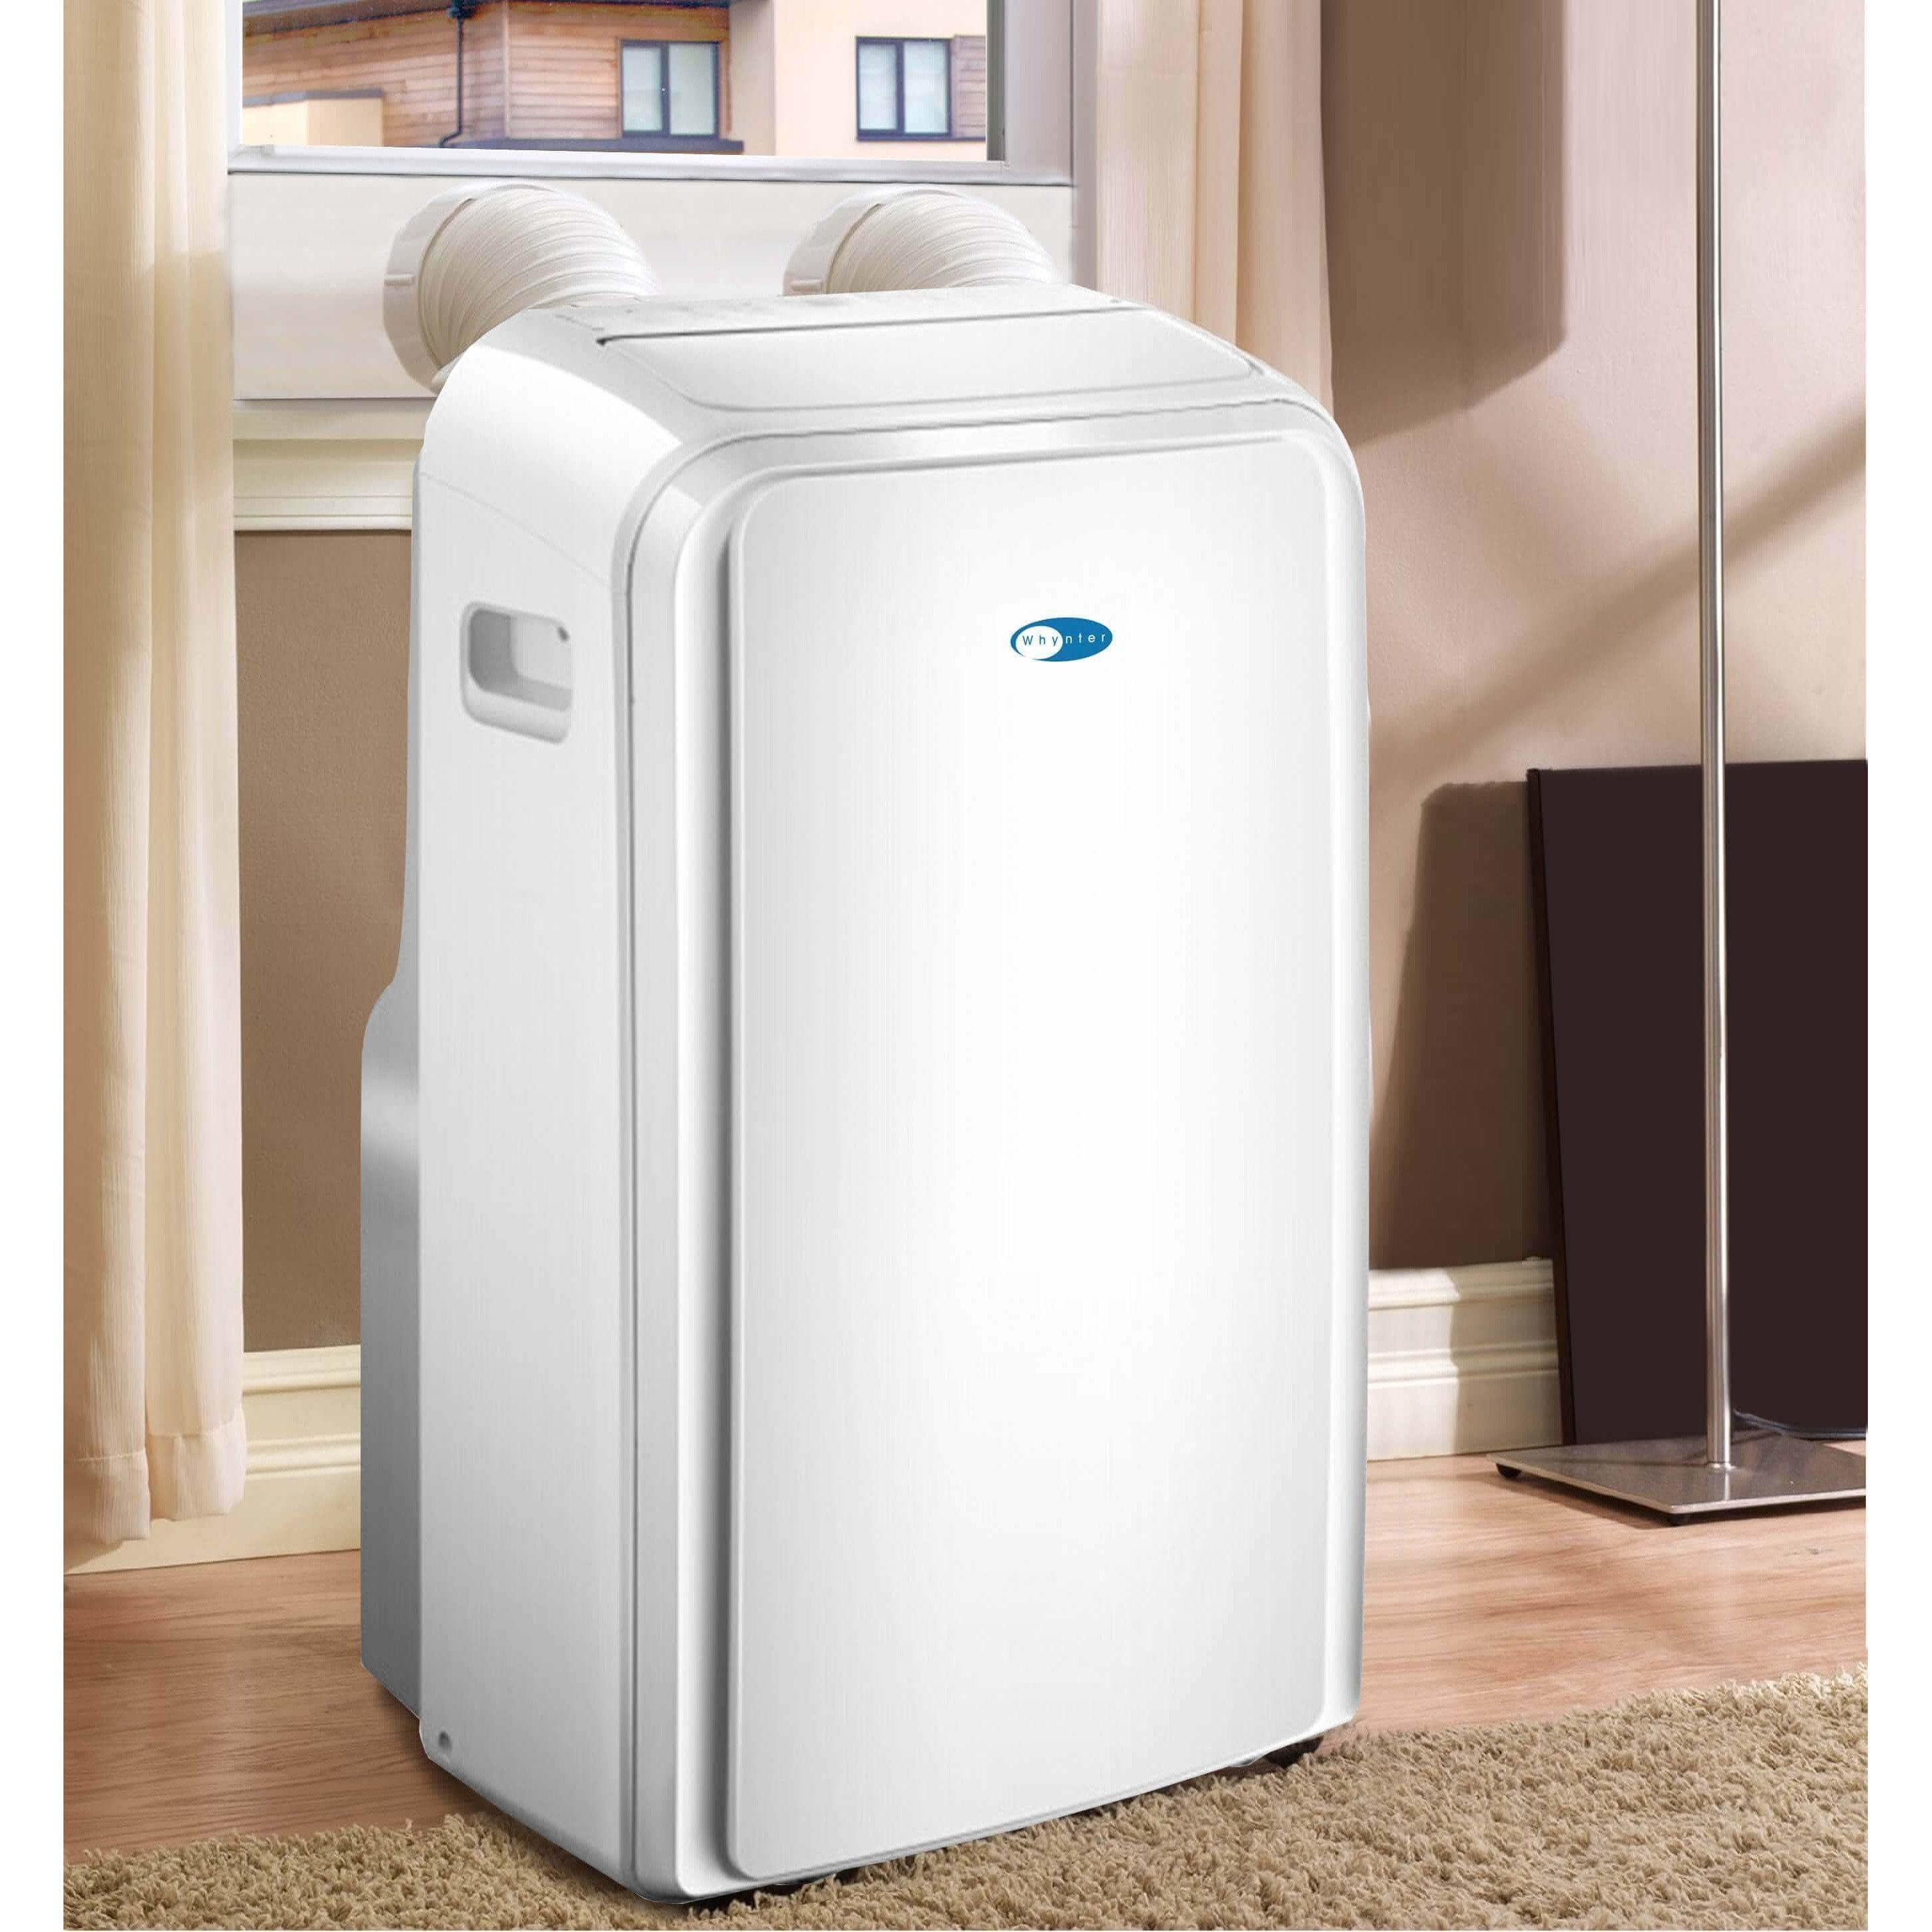 Whynter 12,000 BTU Dual Hose Portable Air Conditioner with 3M and Silvershield filter ARC-126MD Wine Coolers Empire